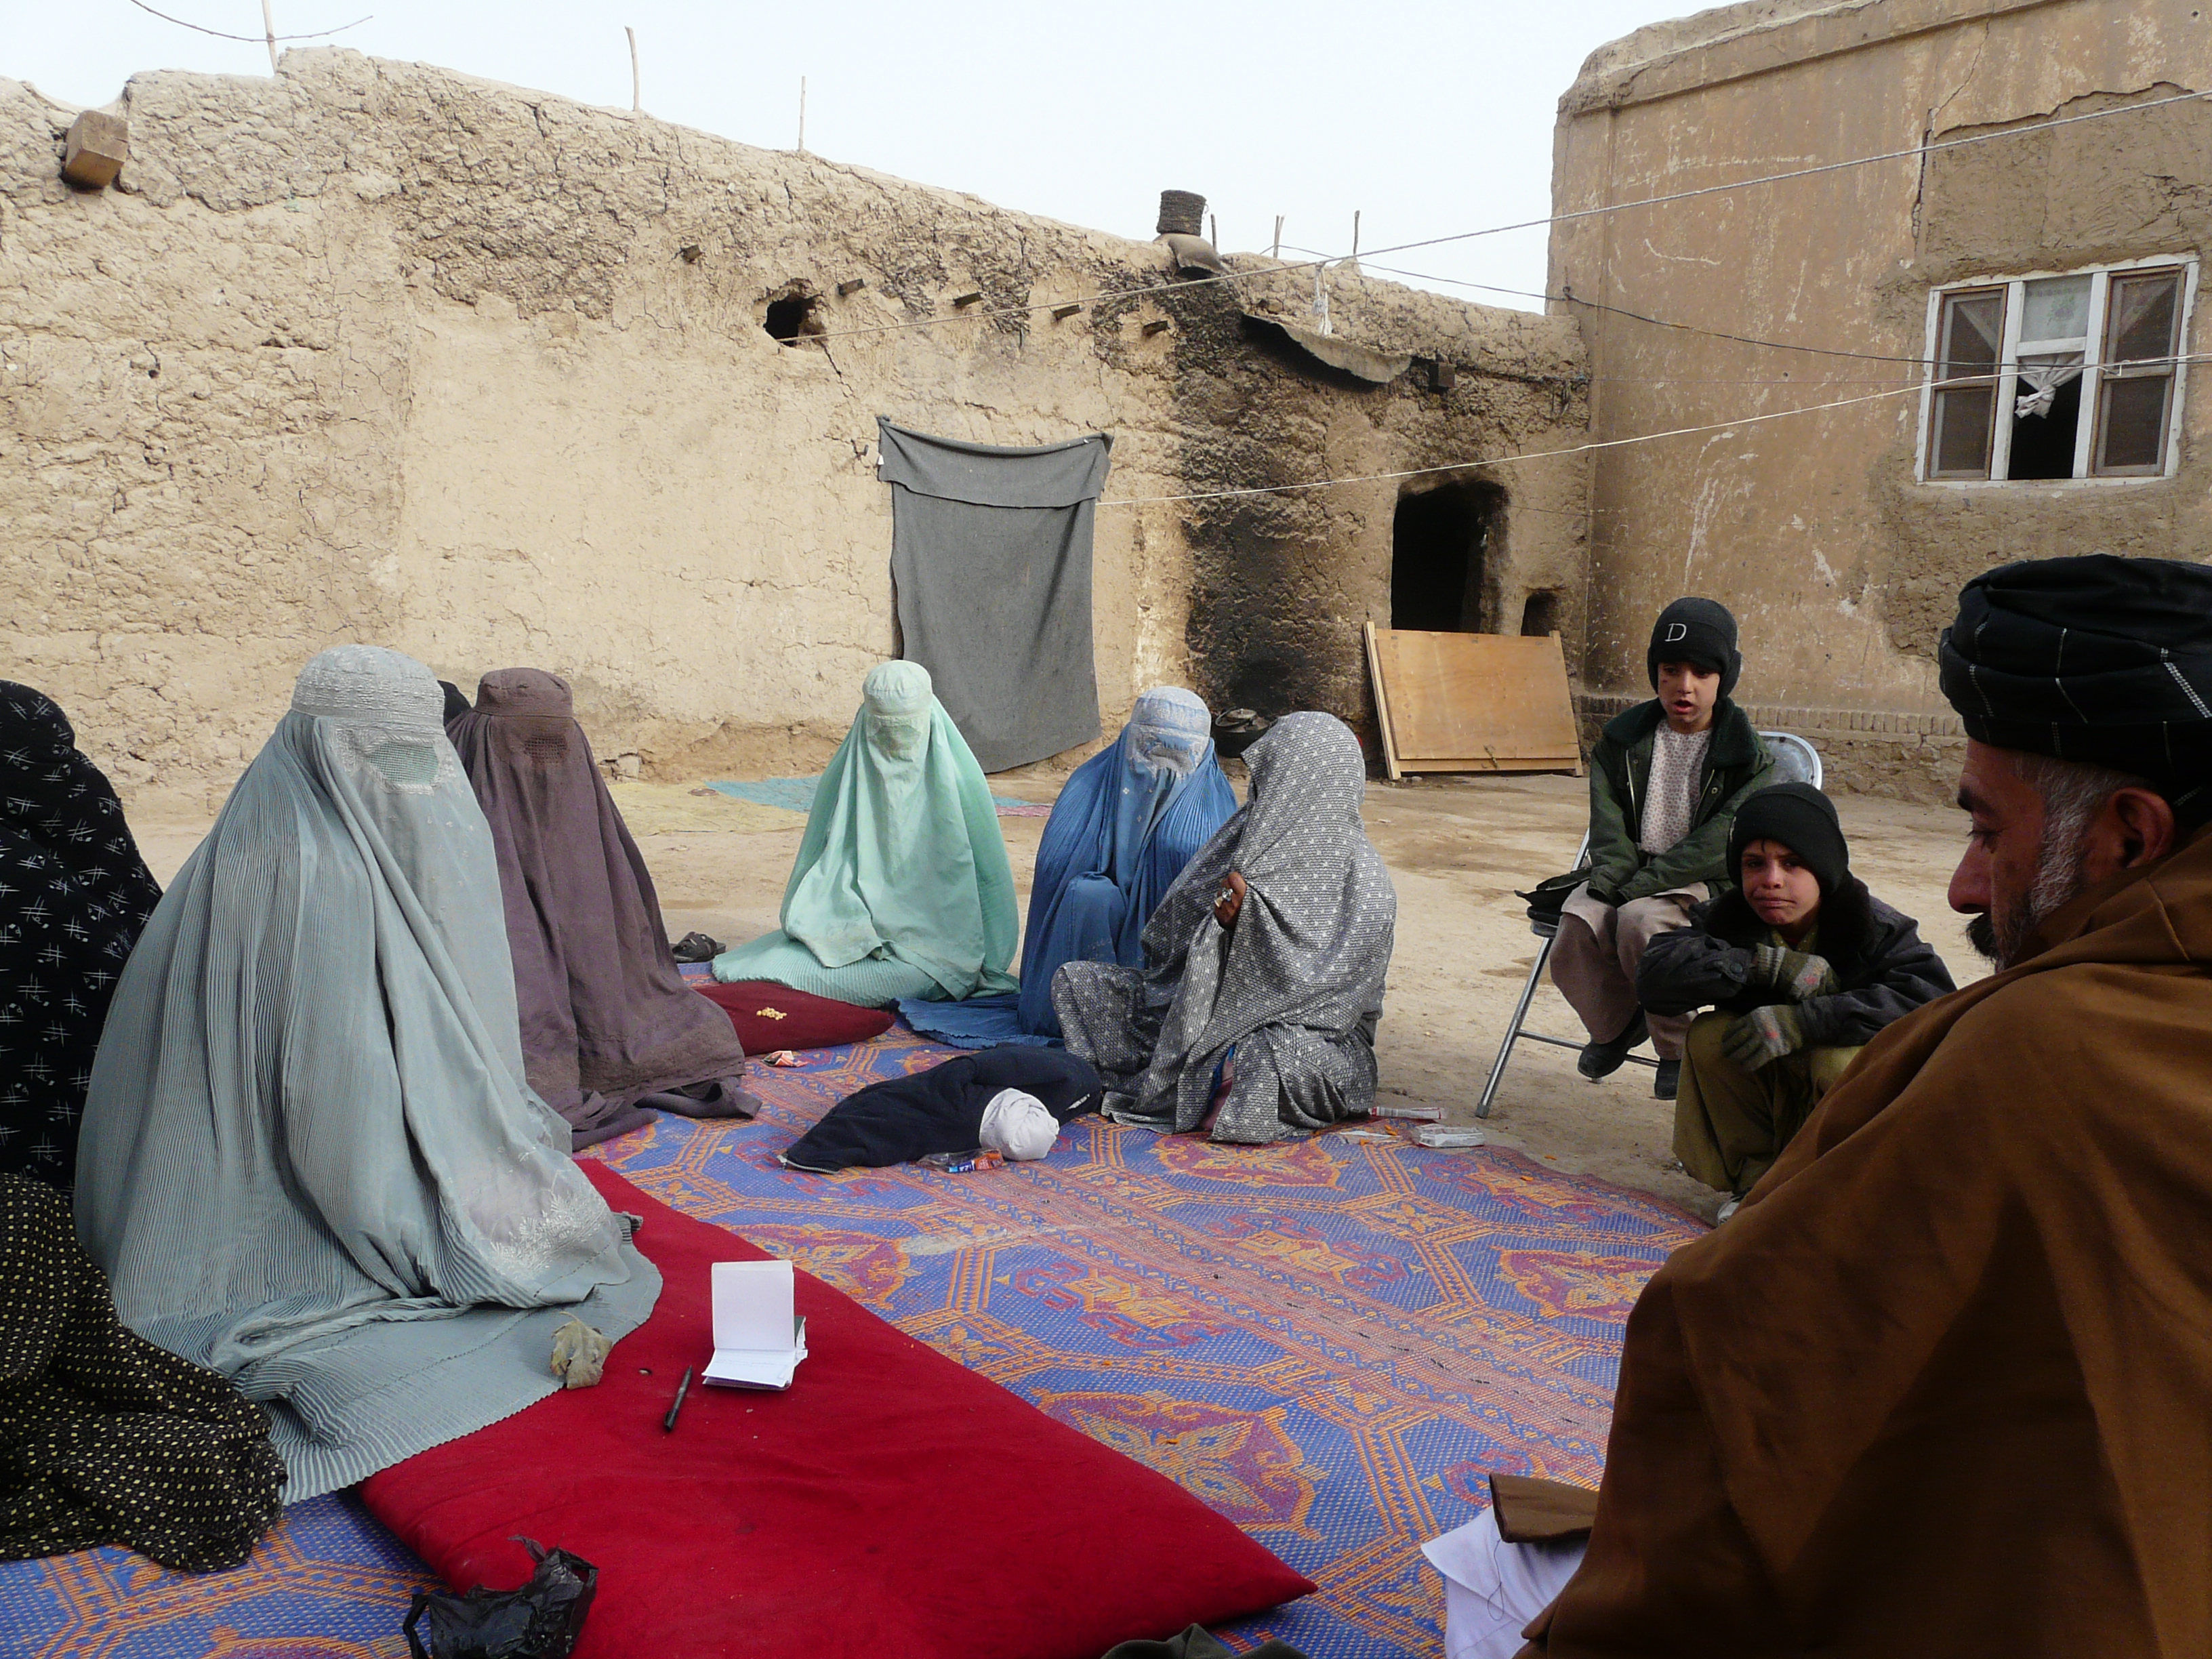 Afghanistan’s advances for women could disappear as soon as US troops leave